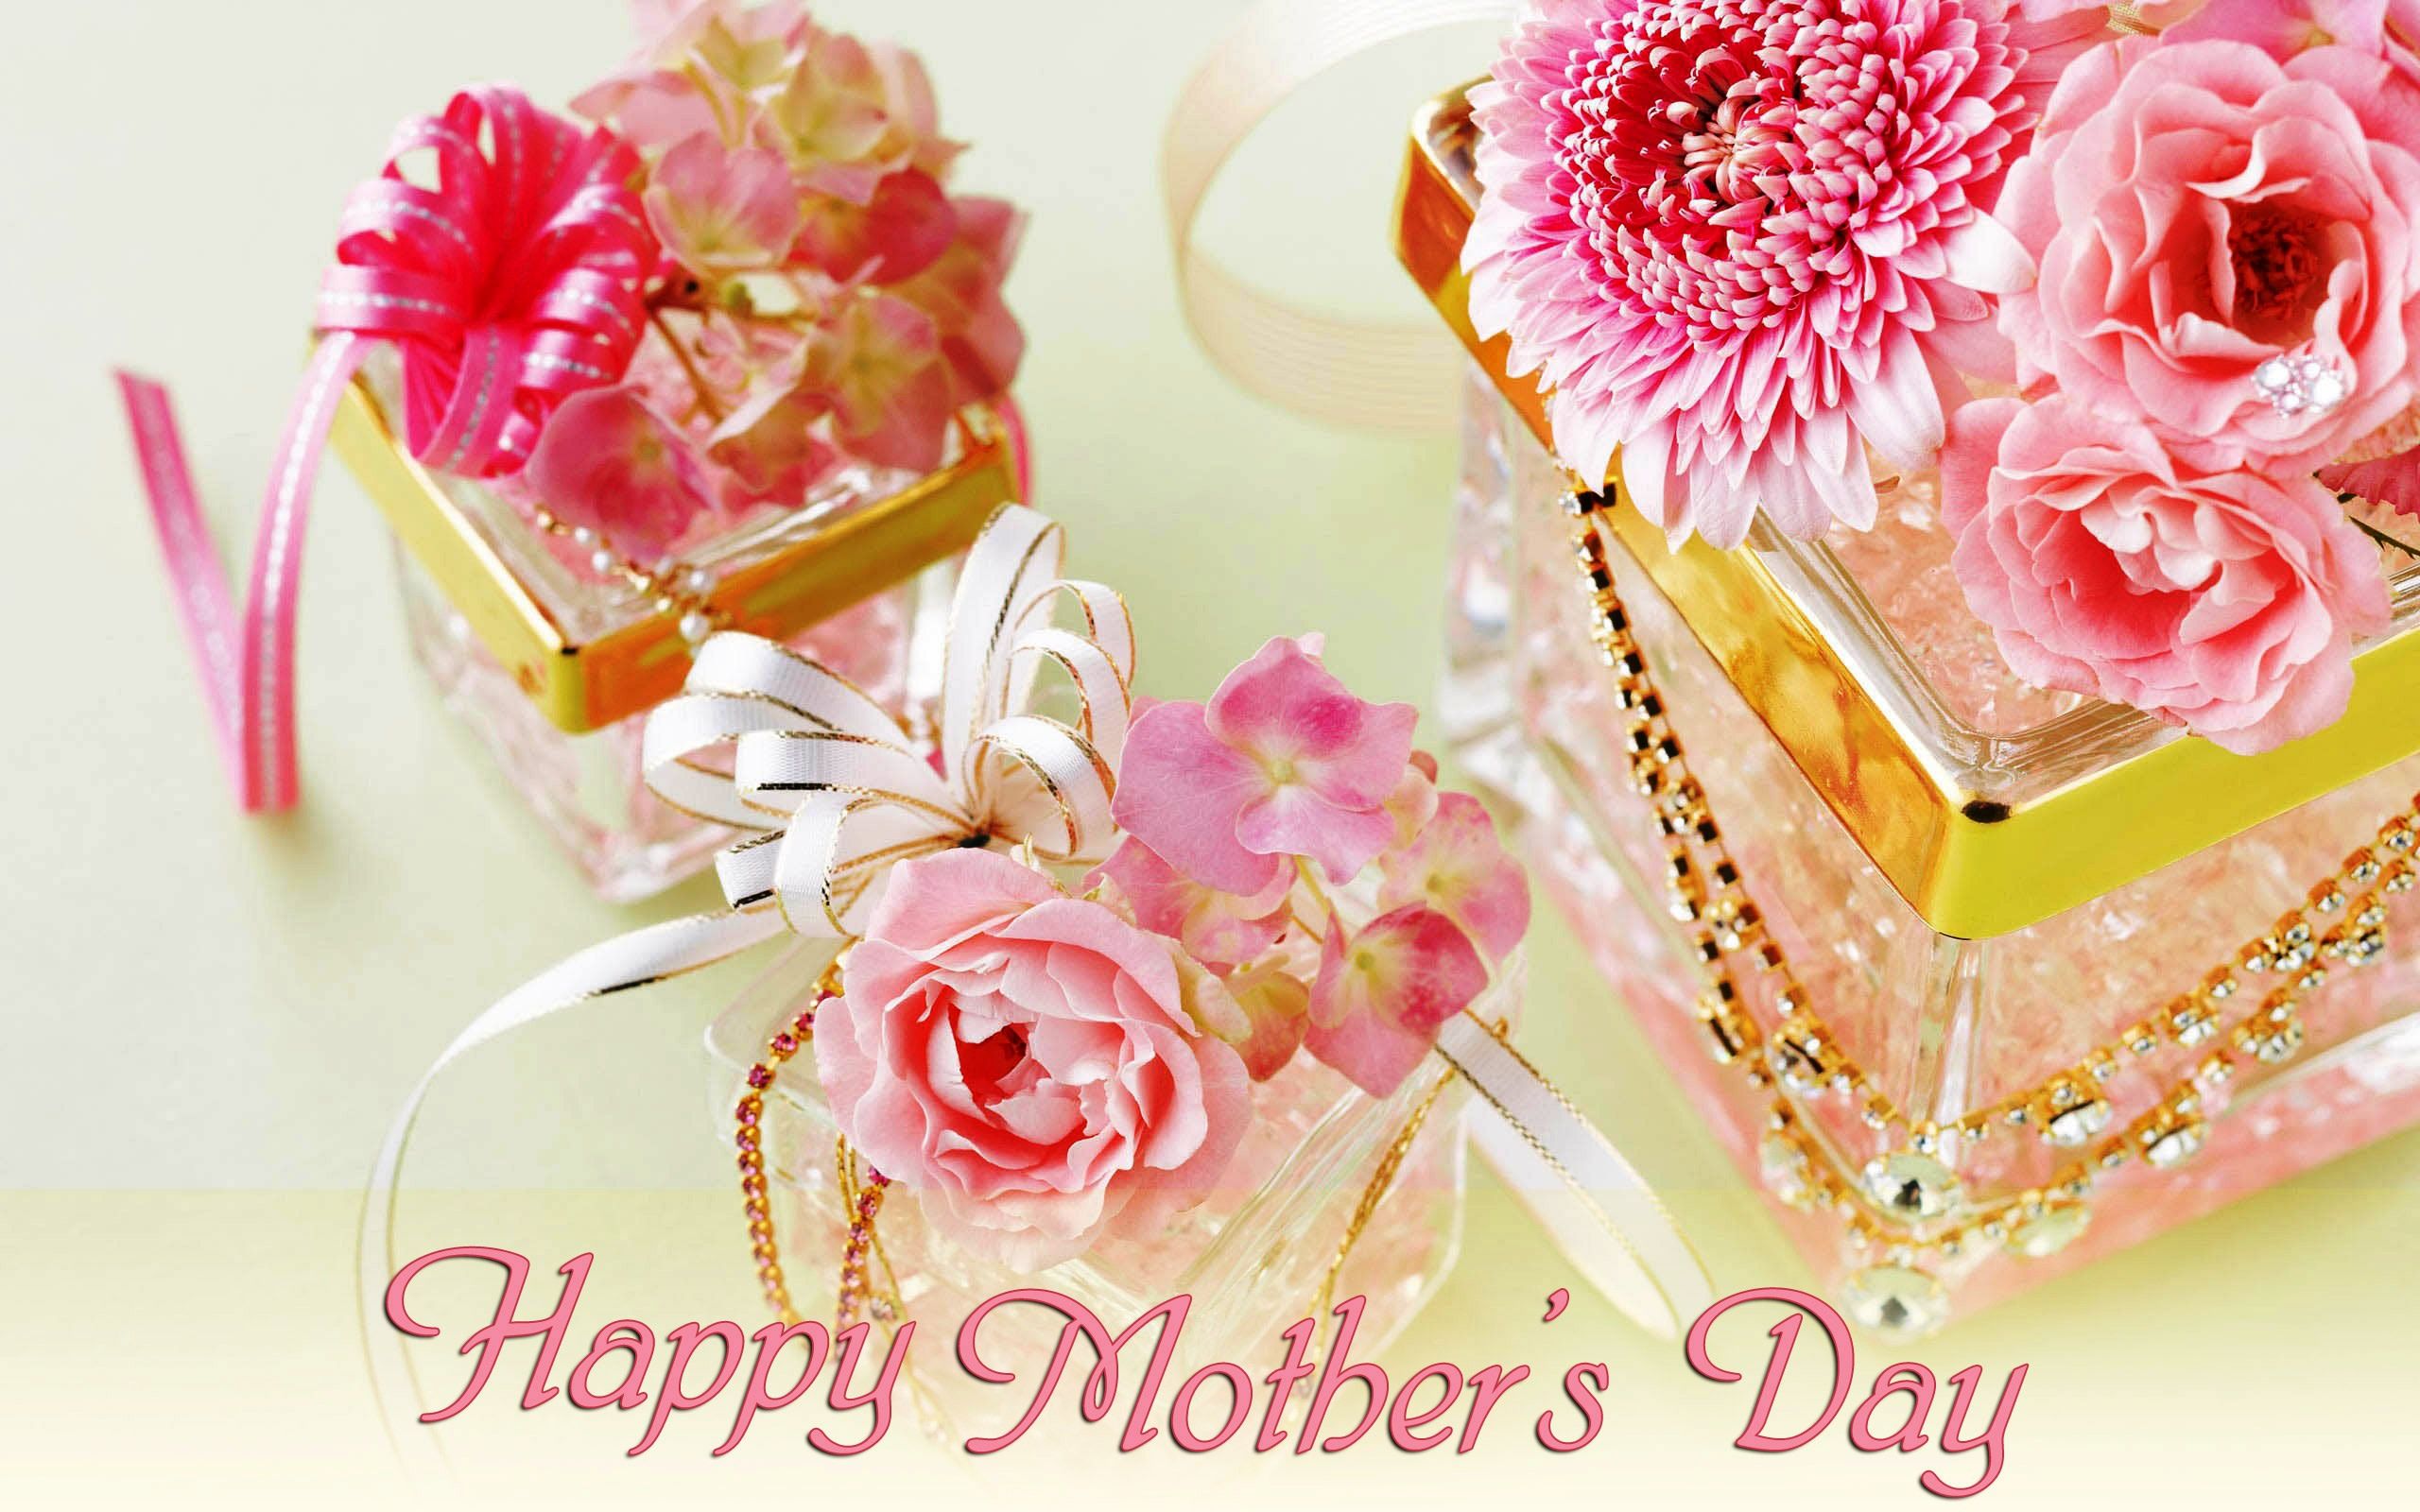 Happy Mother's Day Wallpaper Free